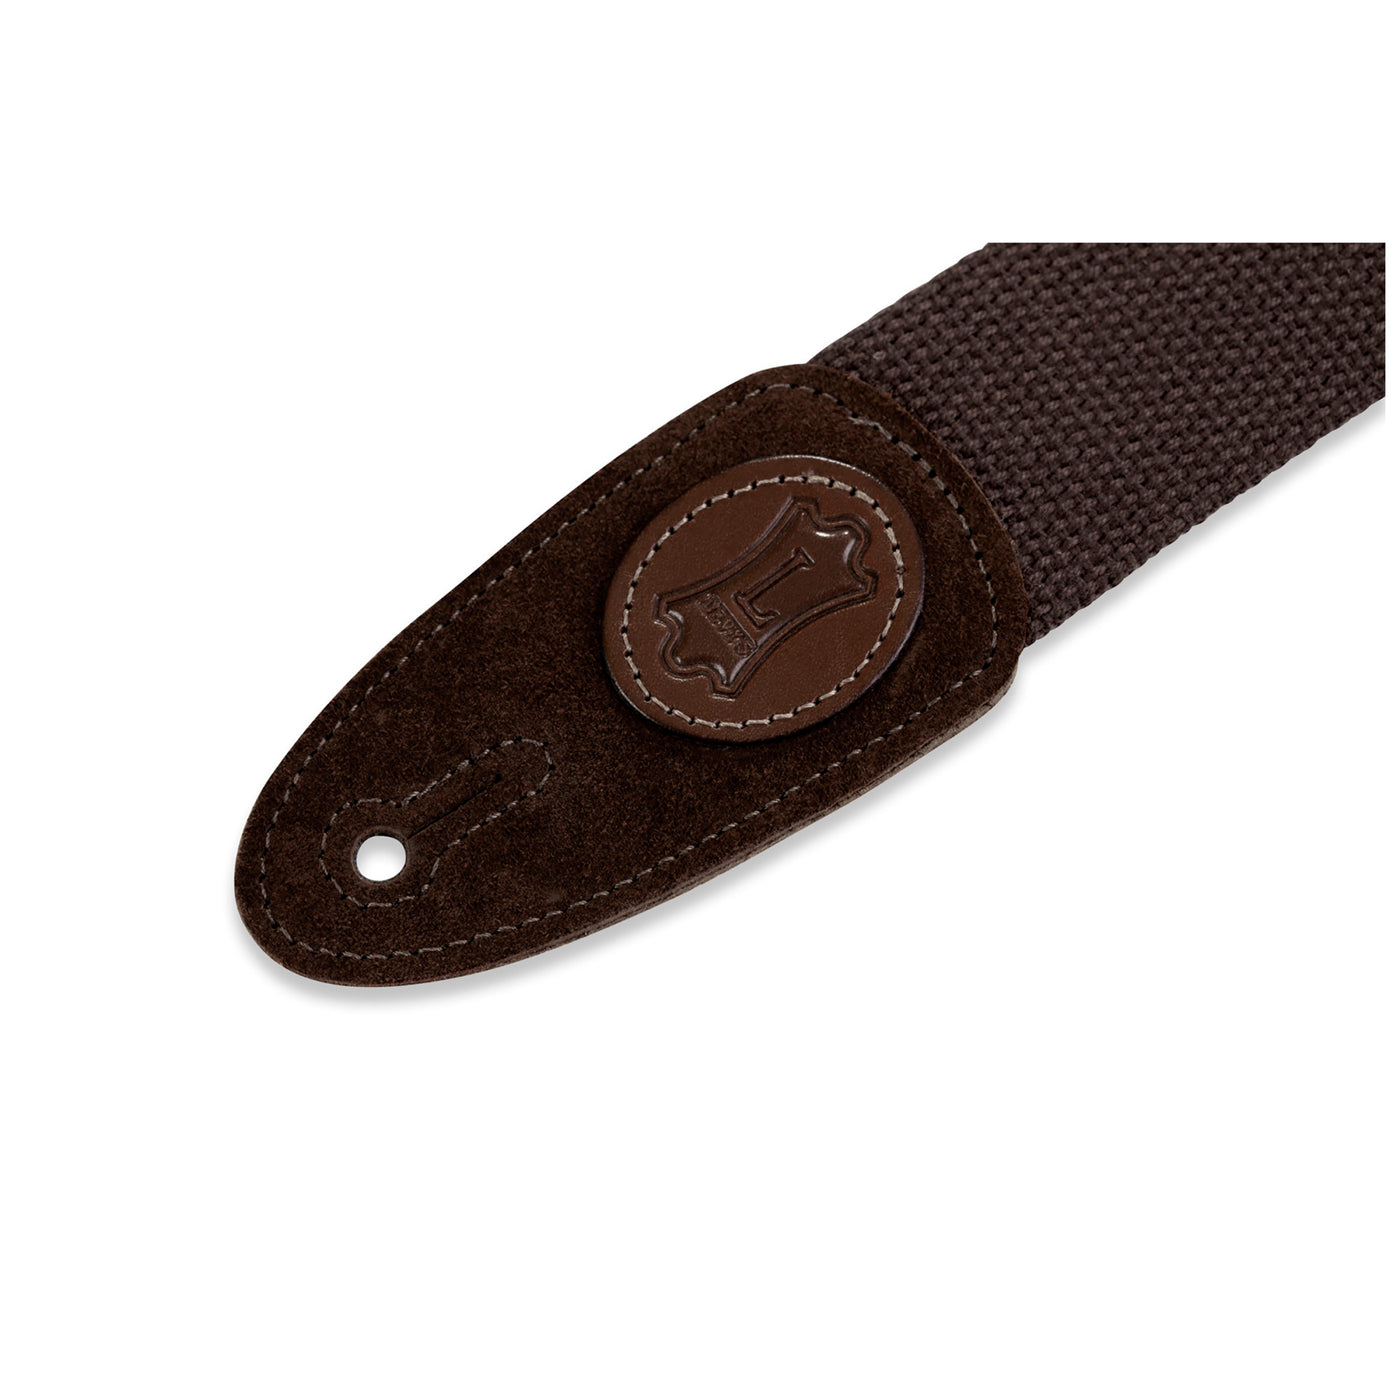 Levy's 2" Signature Series Cotton Strap in Brown